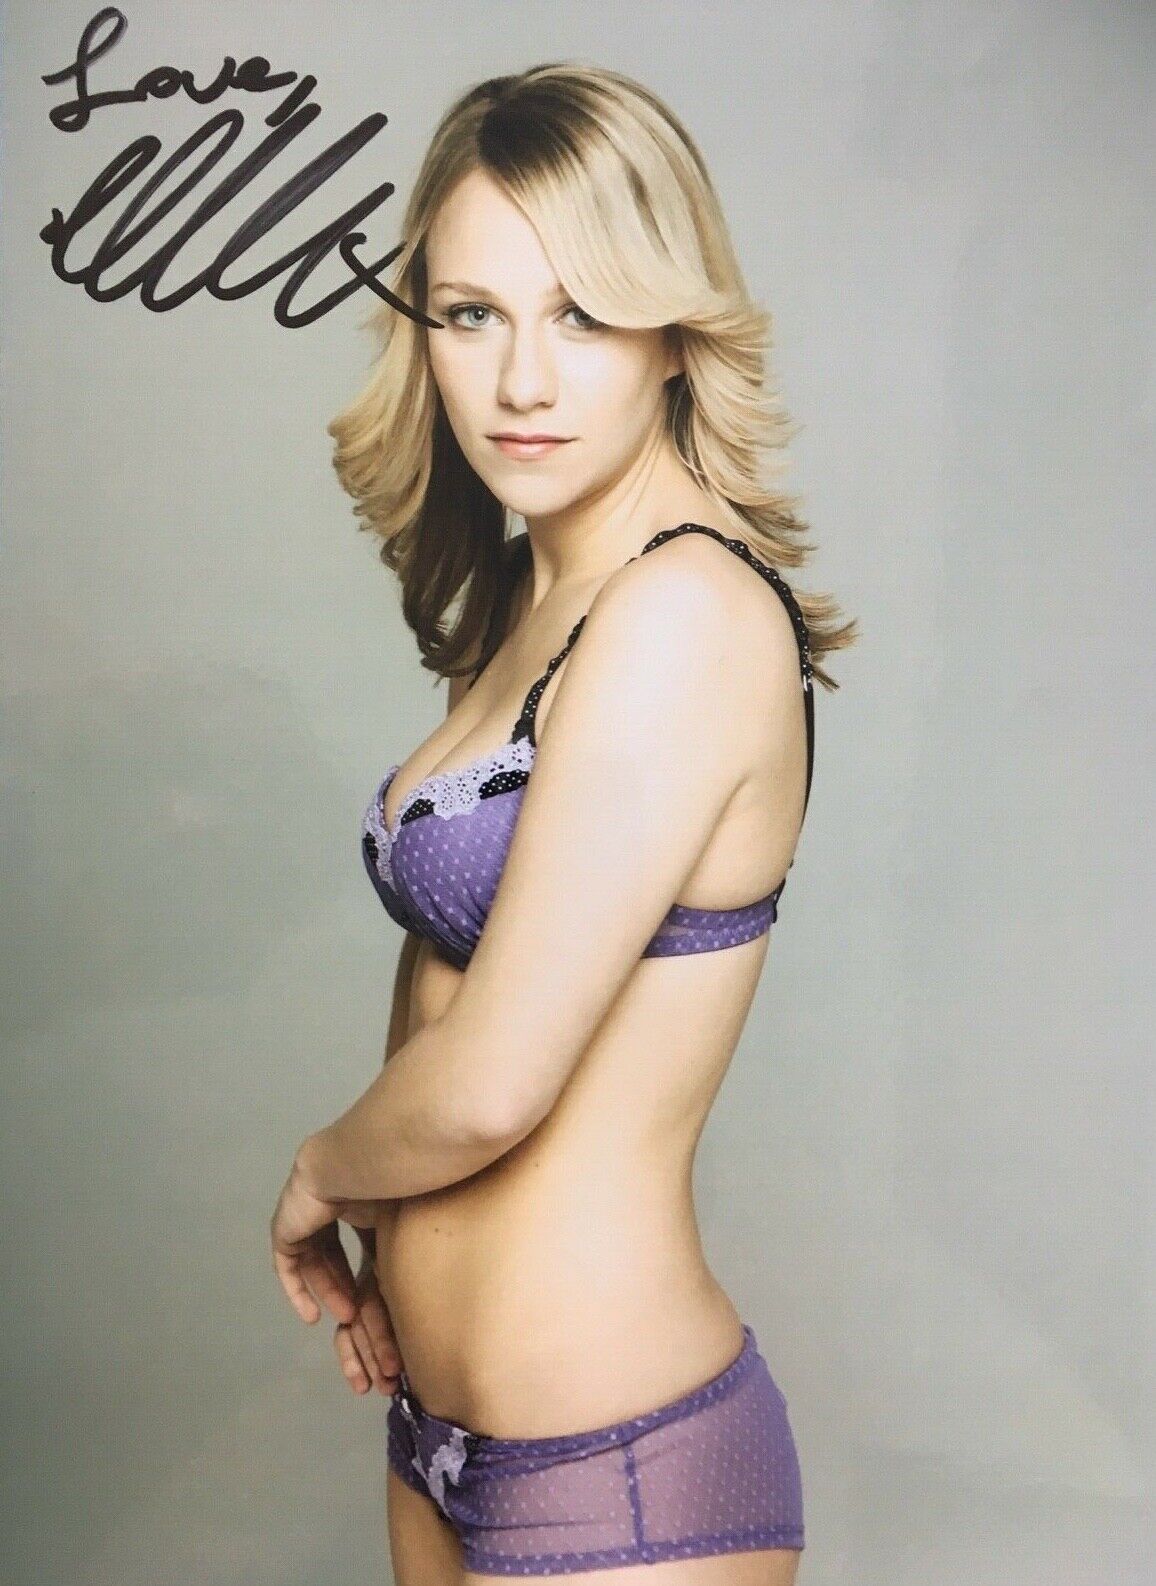 CHLOE MADELEY - TV PRESENTER AND MODEL - STUNNING SIGNED SEXY Photo Poster painting